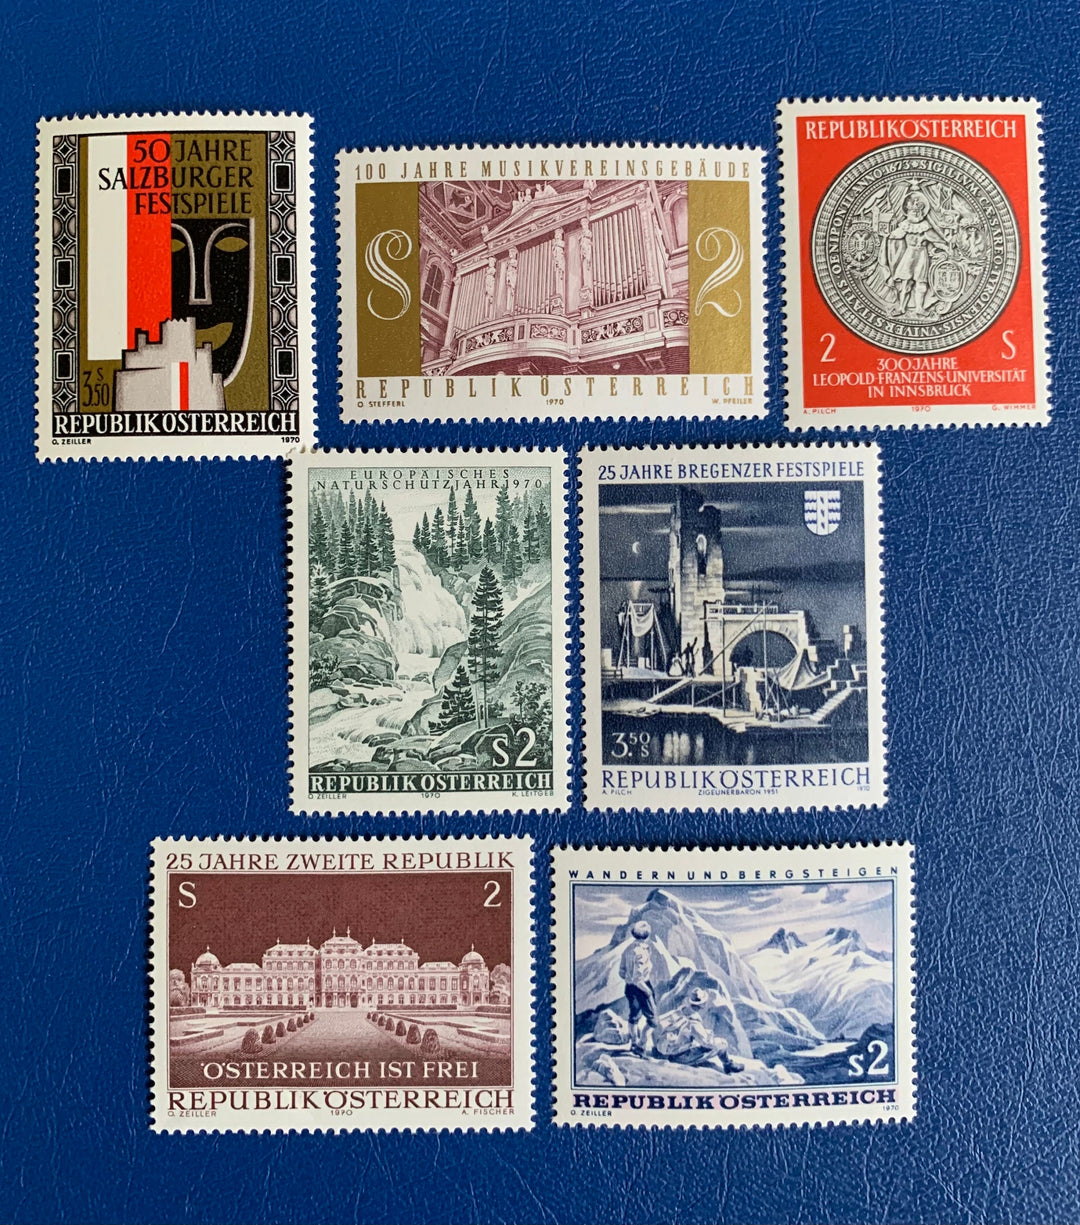 Austria - Original Vintage Postage Stamps - 1970 Mix - for the collector, artist or crafter - scrapbooks, decoupage